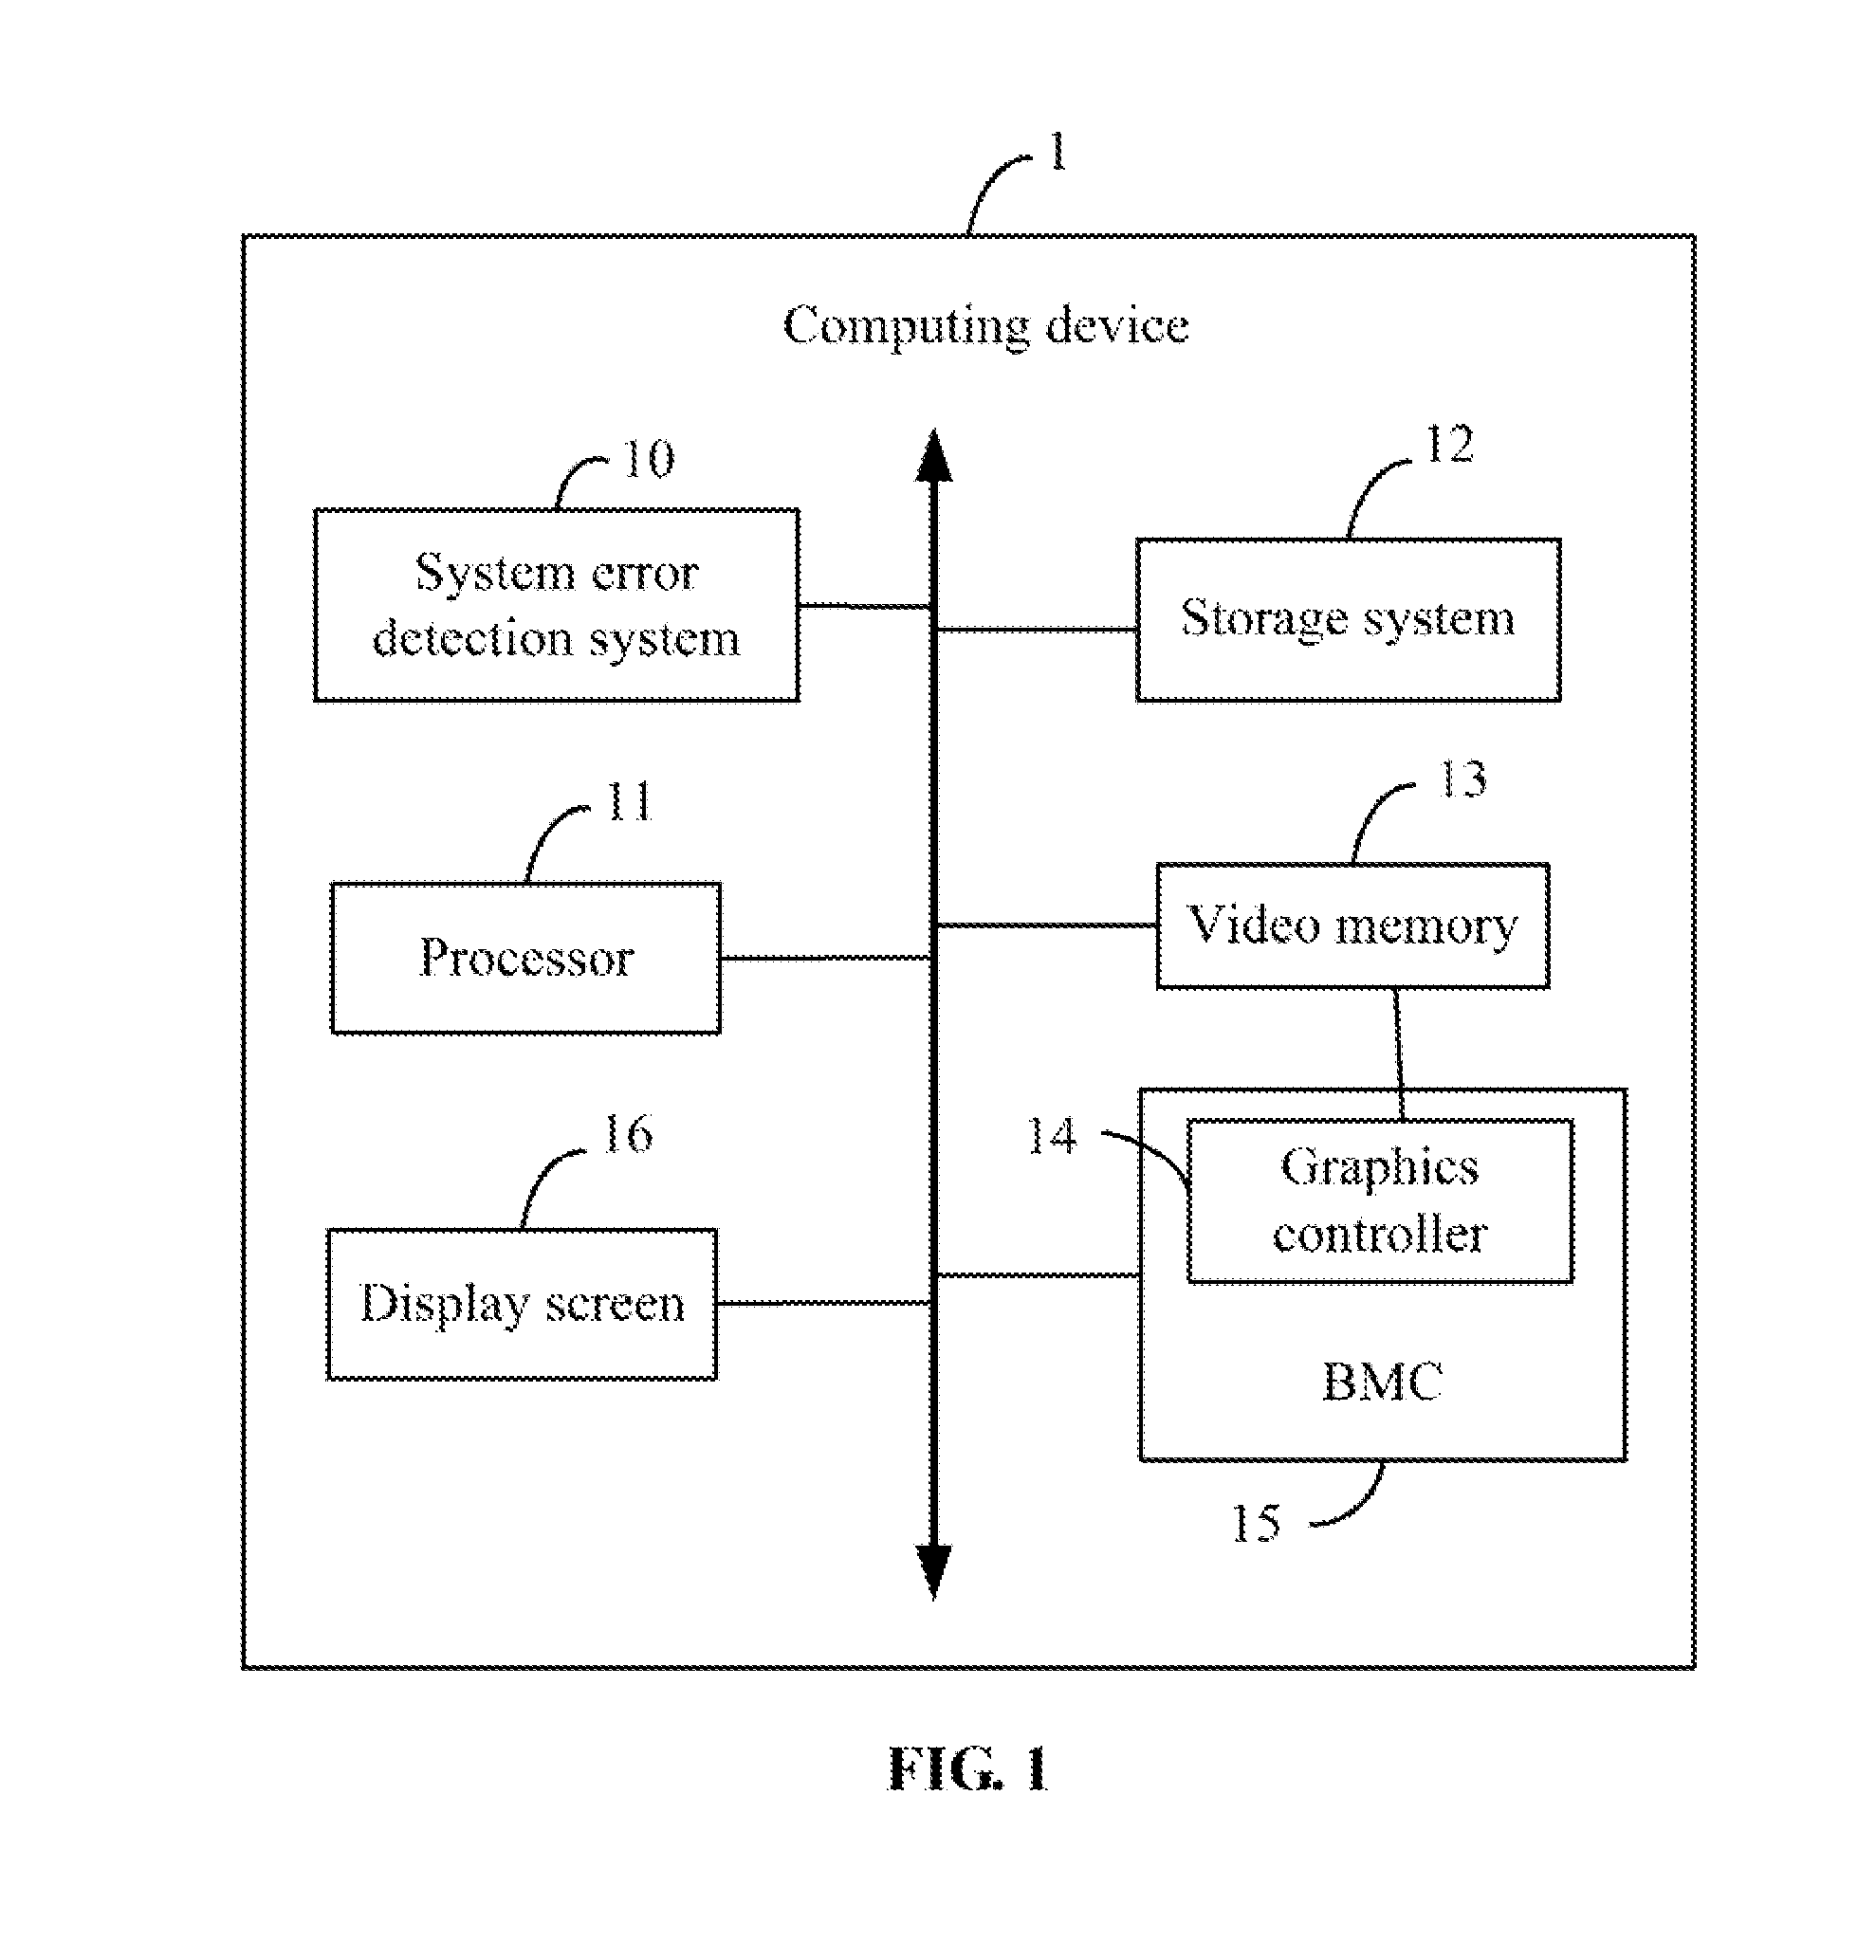 Computing device and system error detection method